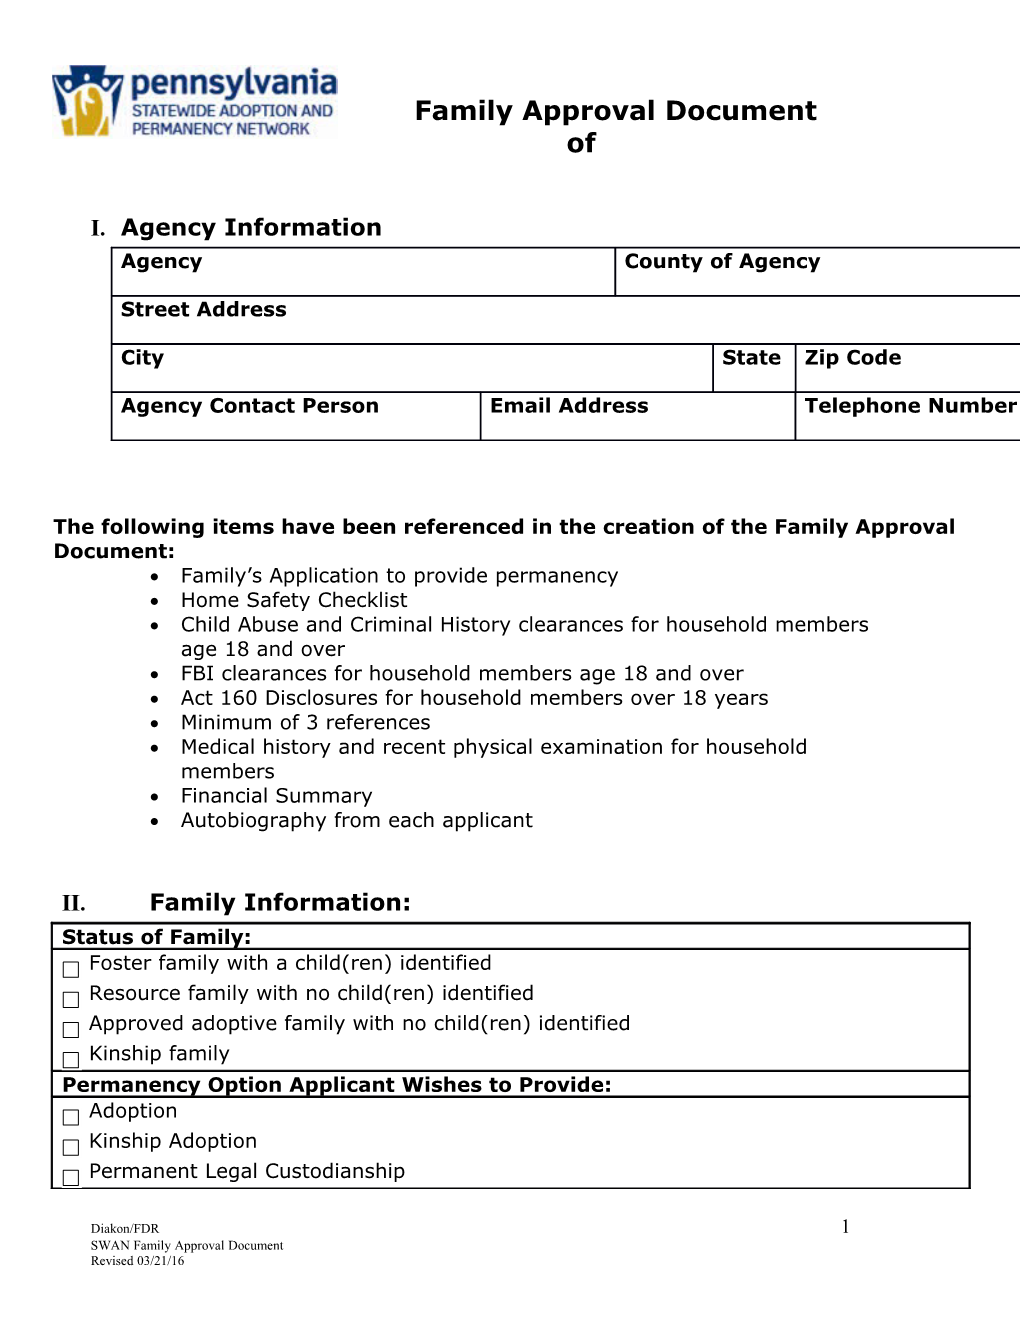 Family Approval Document